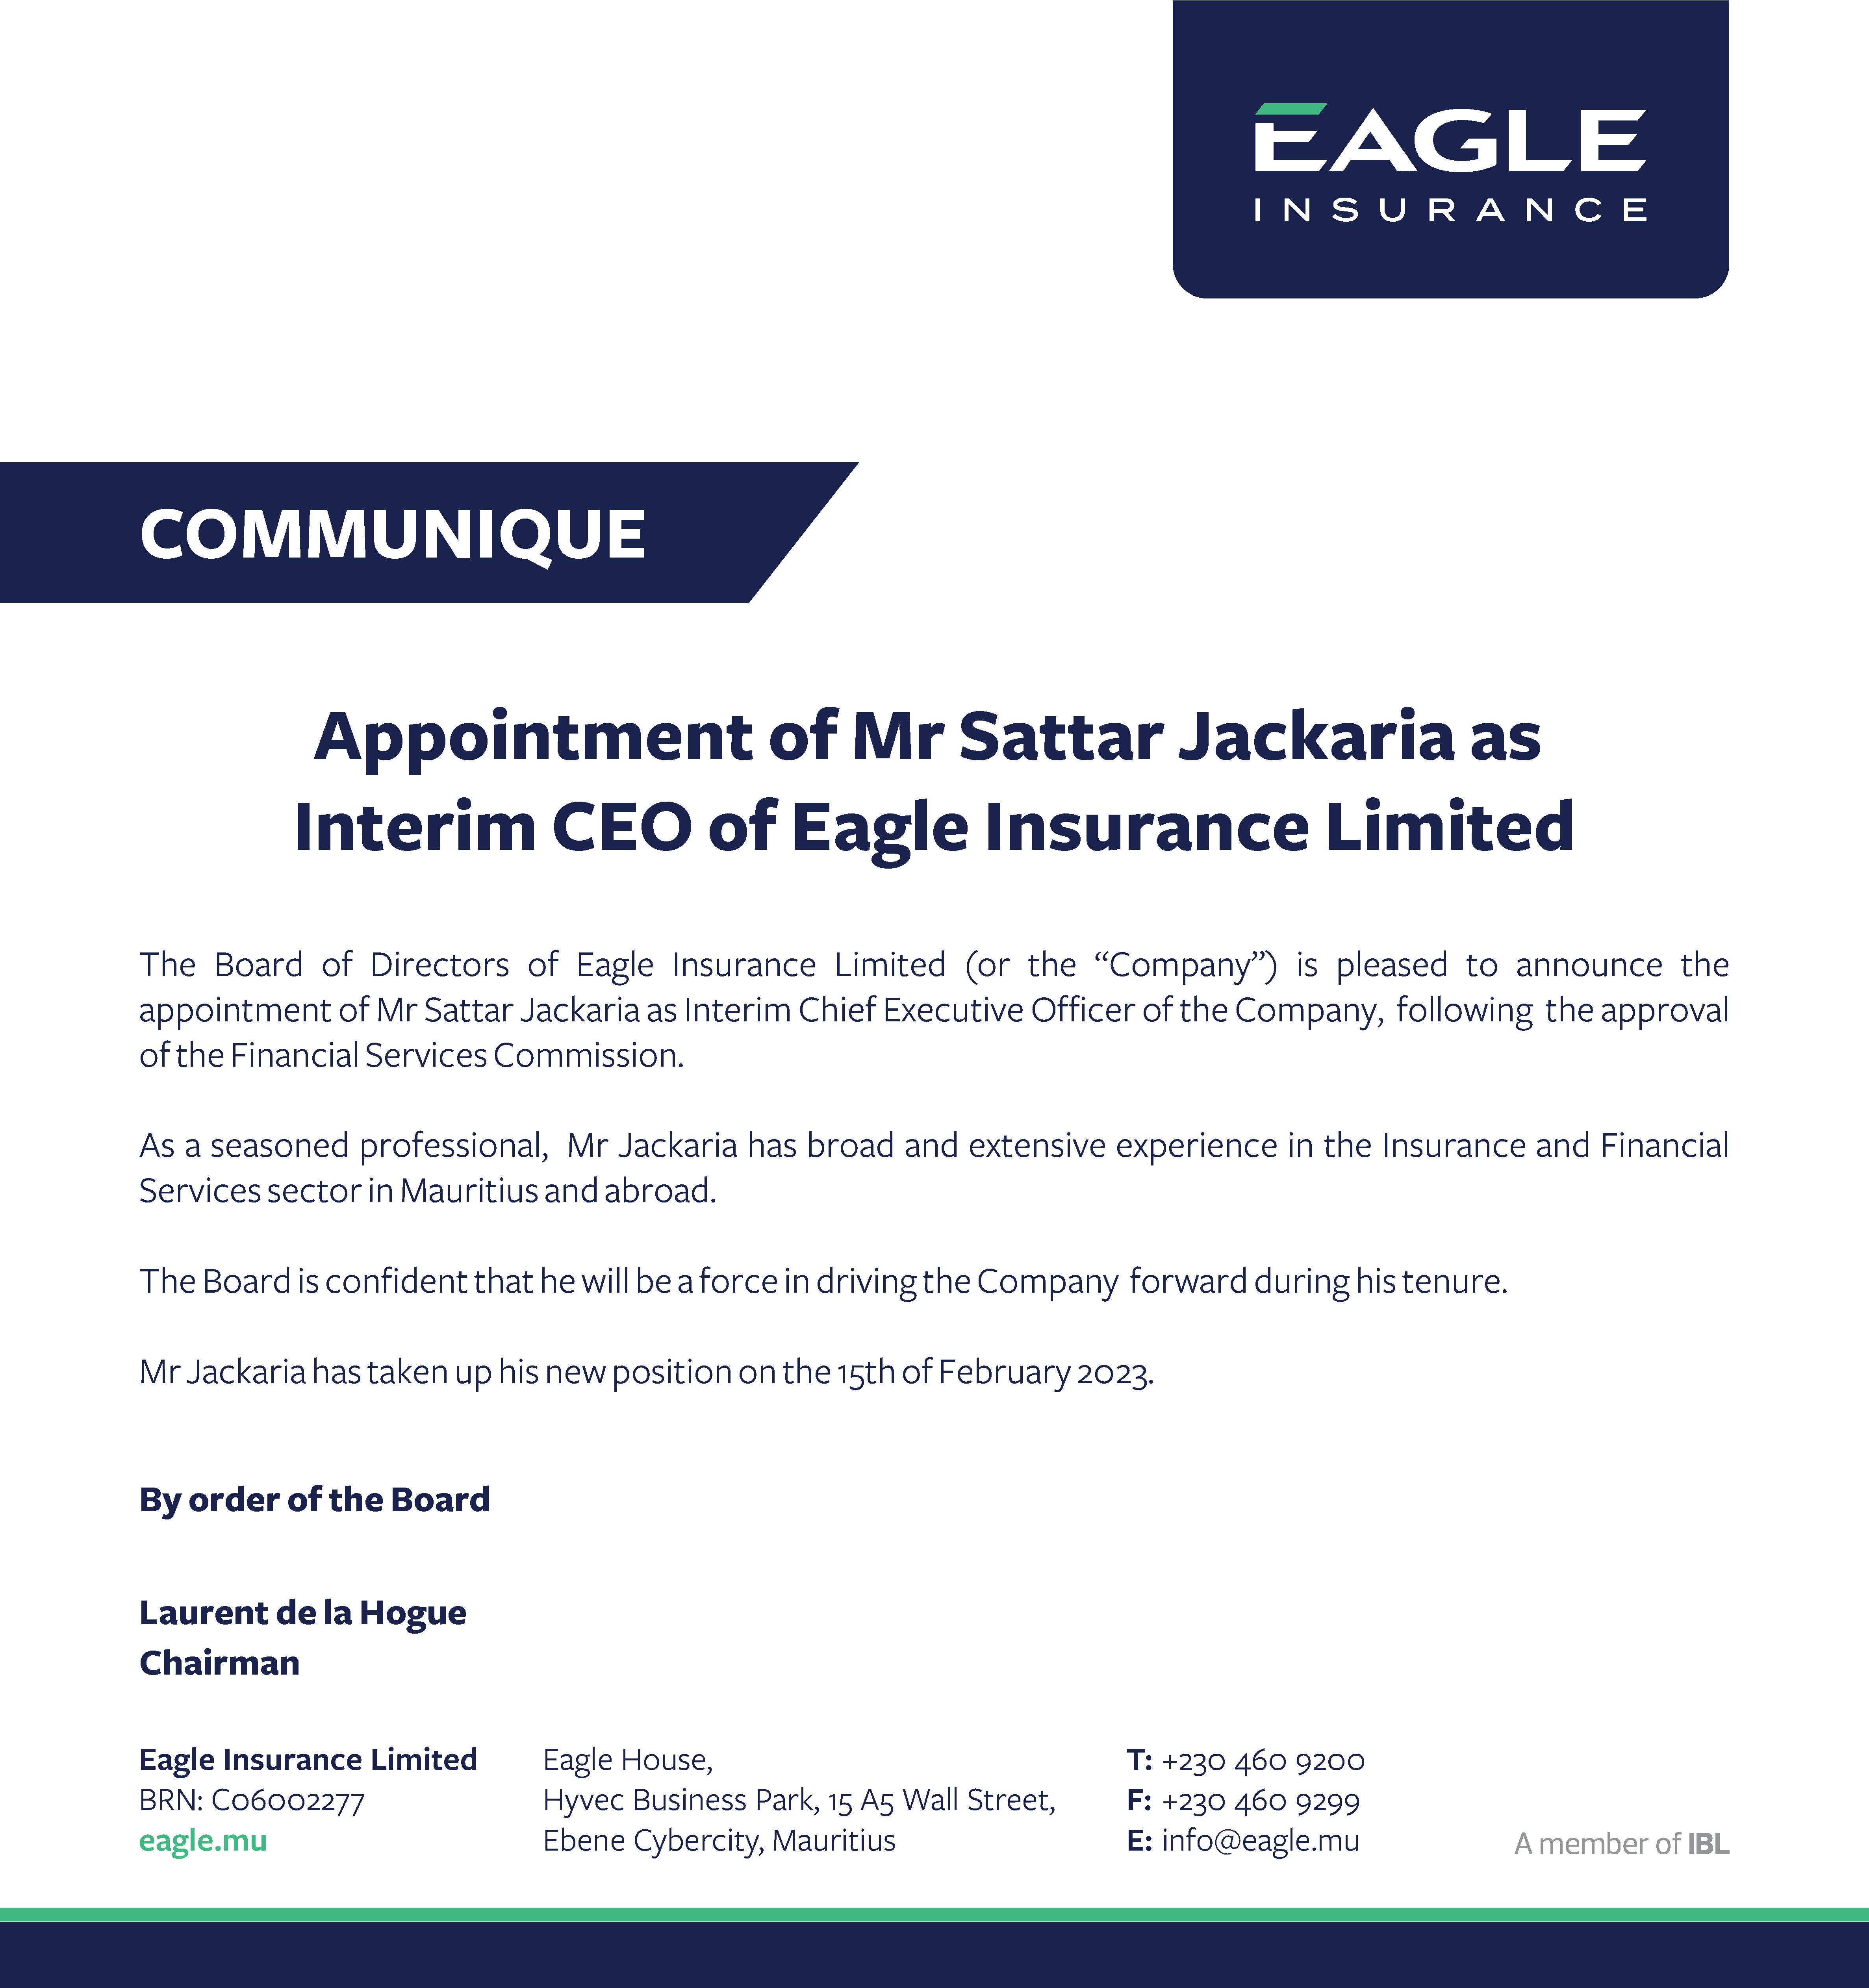 Appointment of Sattar Jackaria as Interim CEO of Eagle Insurance Limited